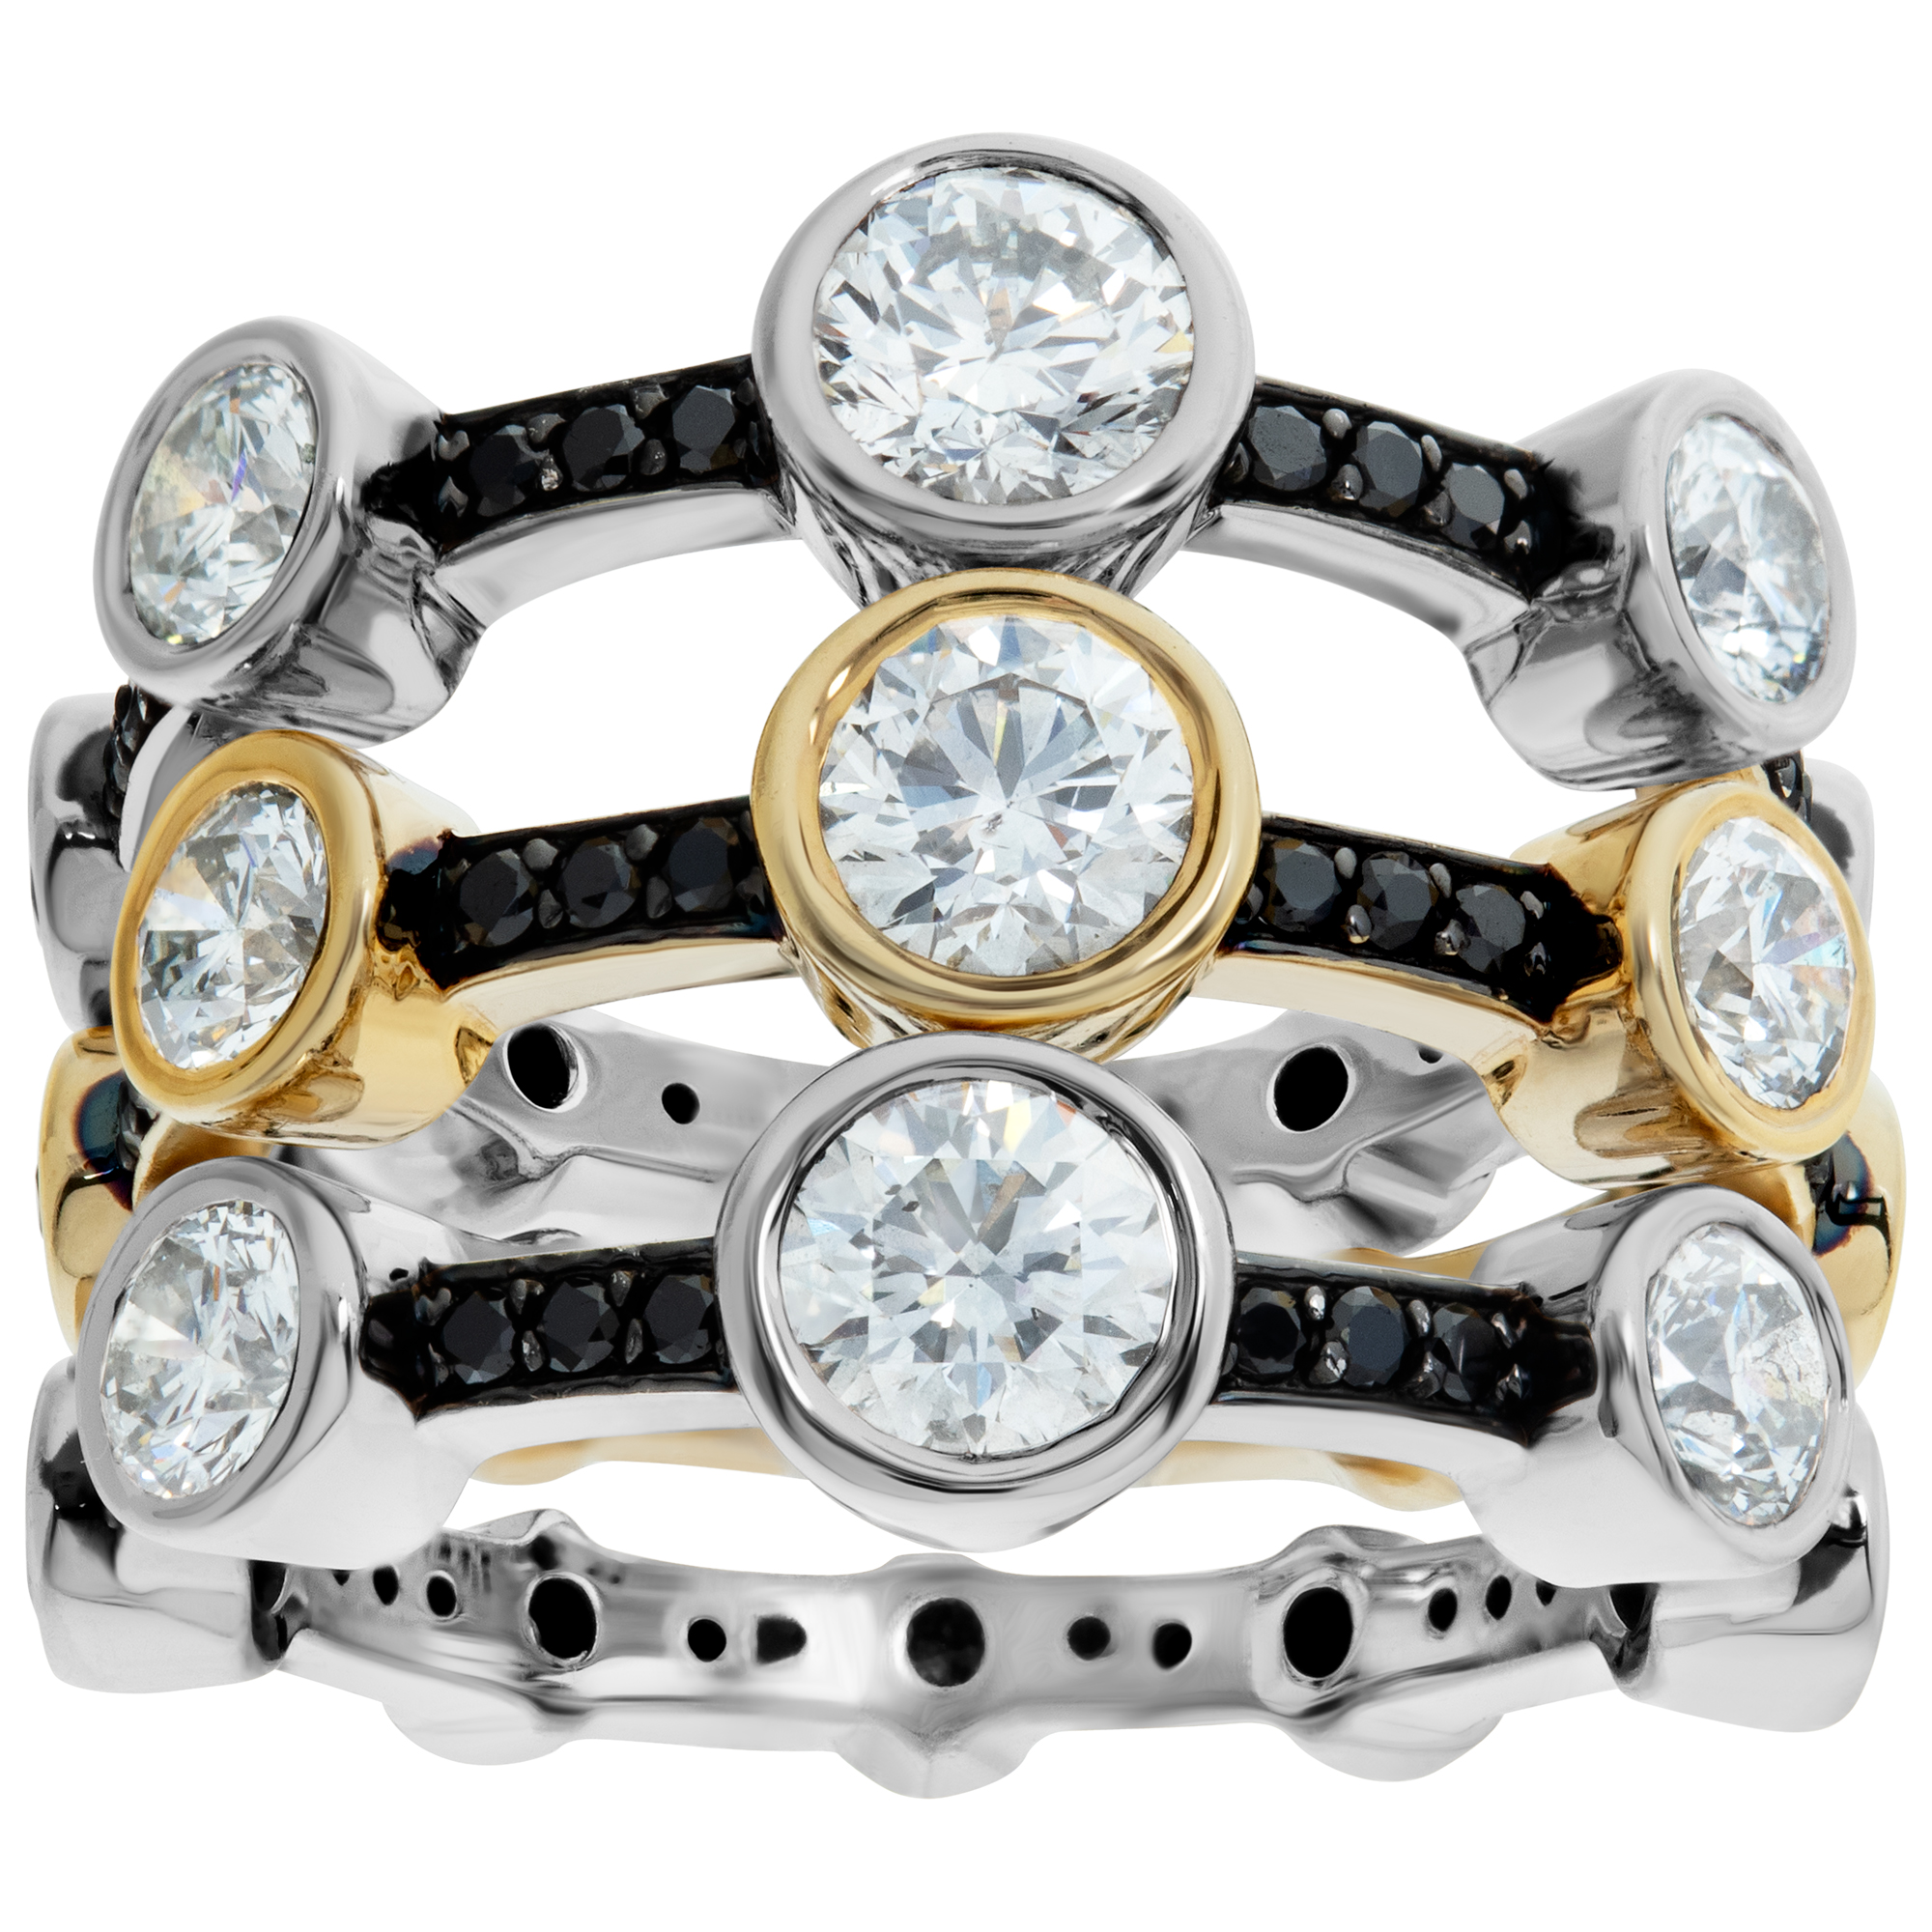 Diamond Eternity Band and Ring in bezel in 18k gold. 3.25cts in diamonds. Size 4.75 image 1